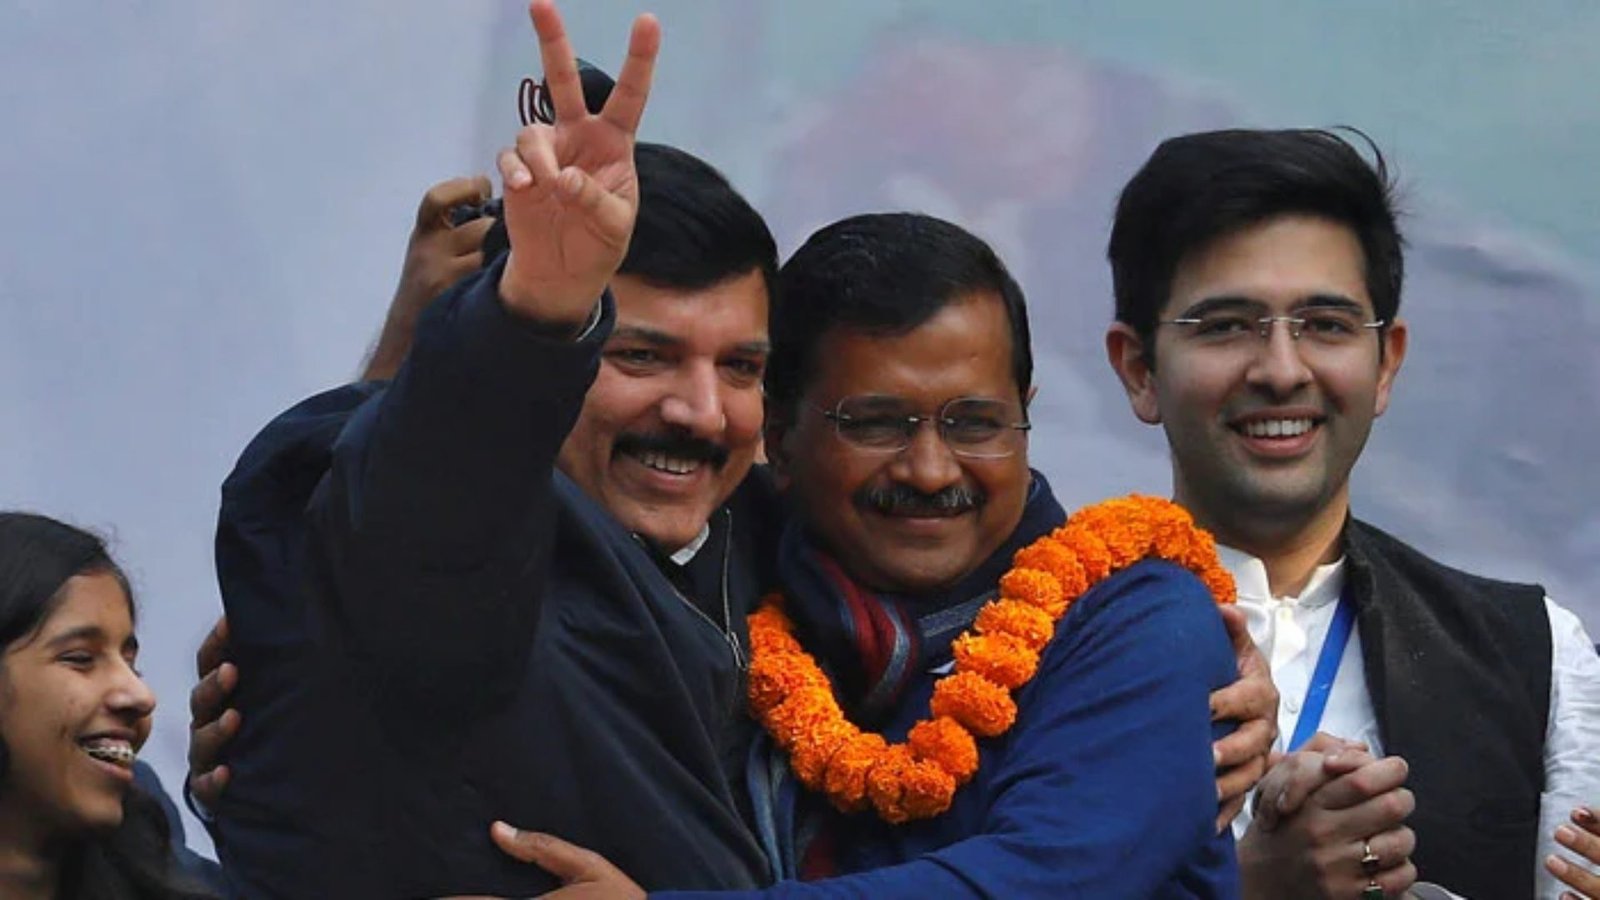 Modi’s rival Arvind Kejriwal released from jail to campaign in elections